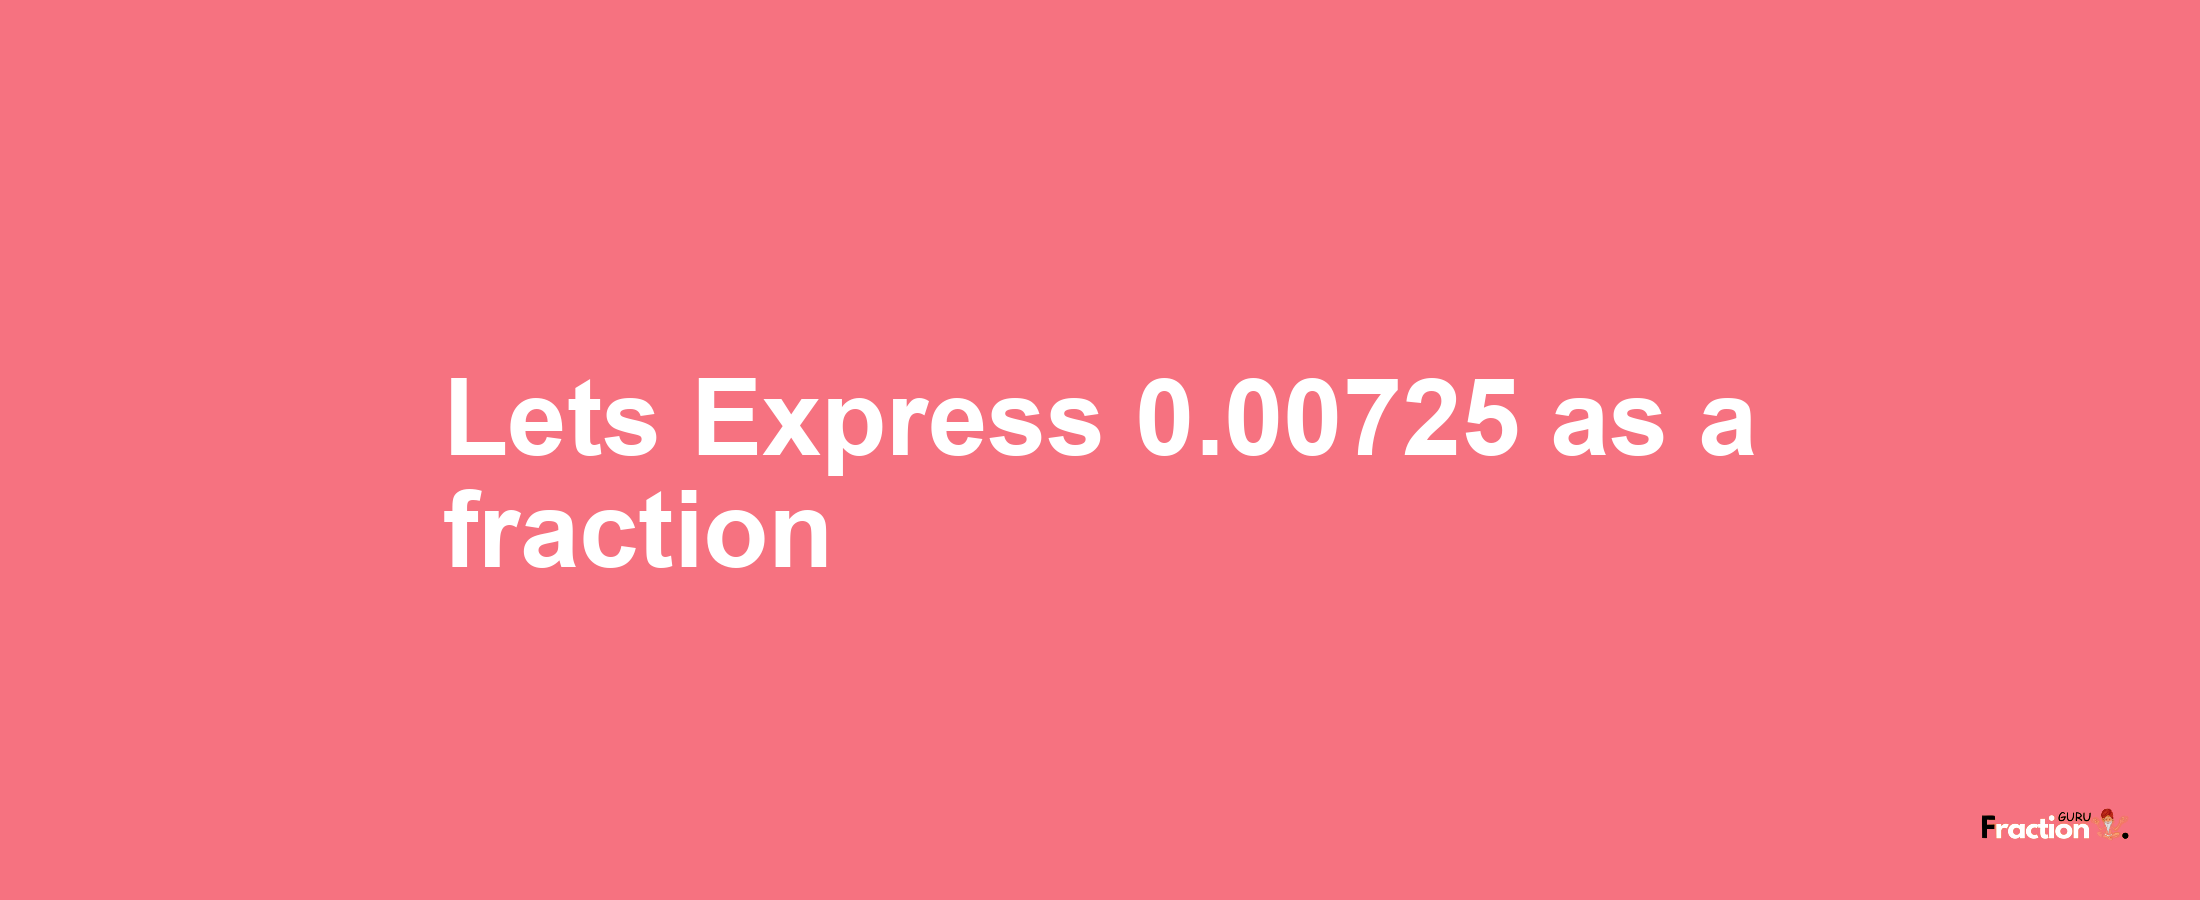 Lets Express 0.00725 as afraction